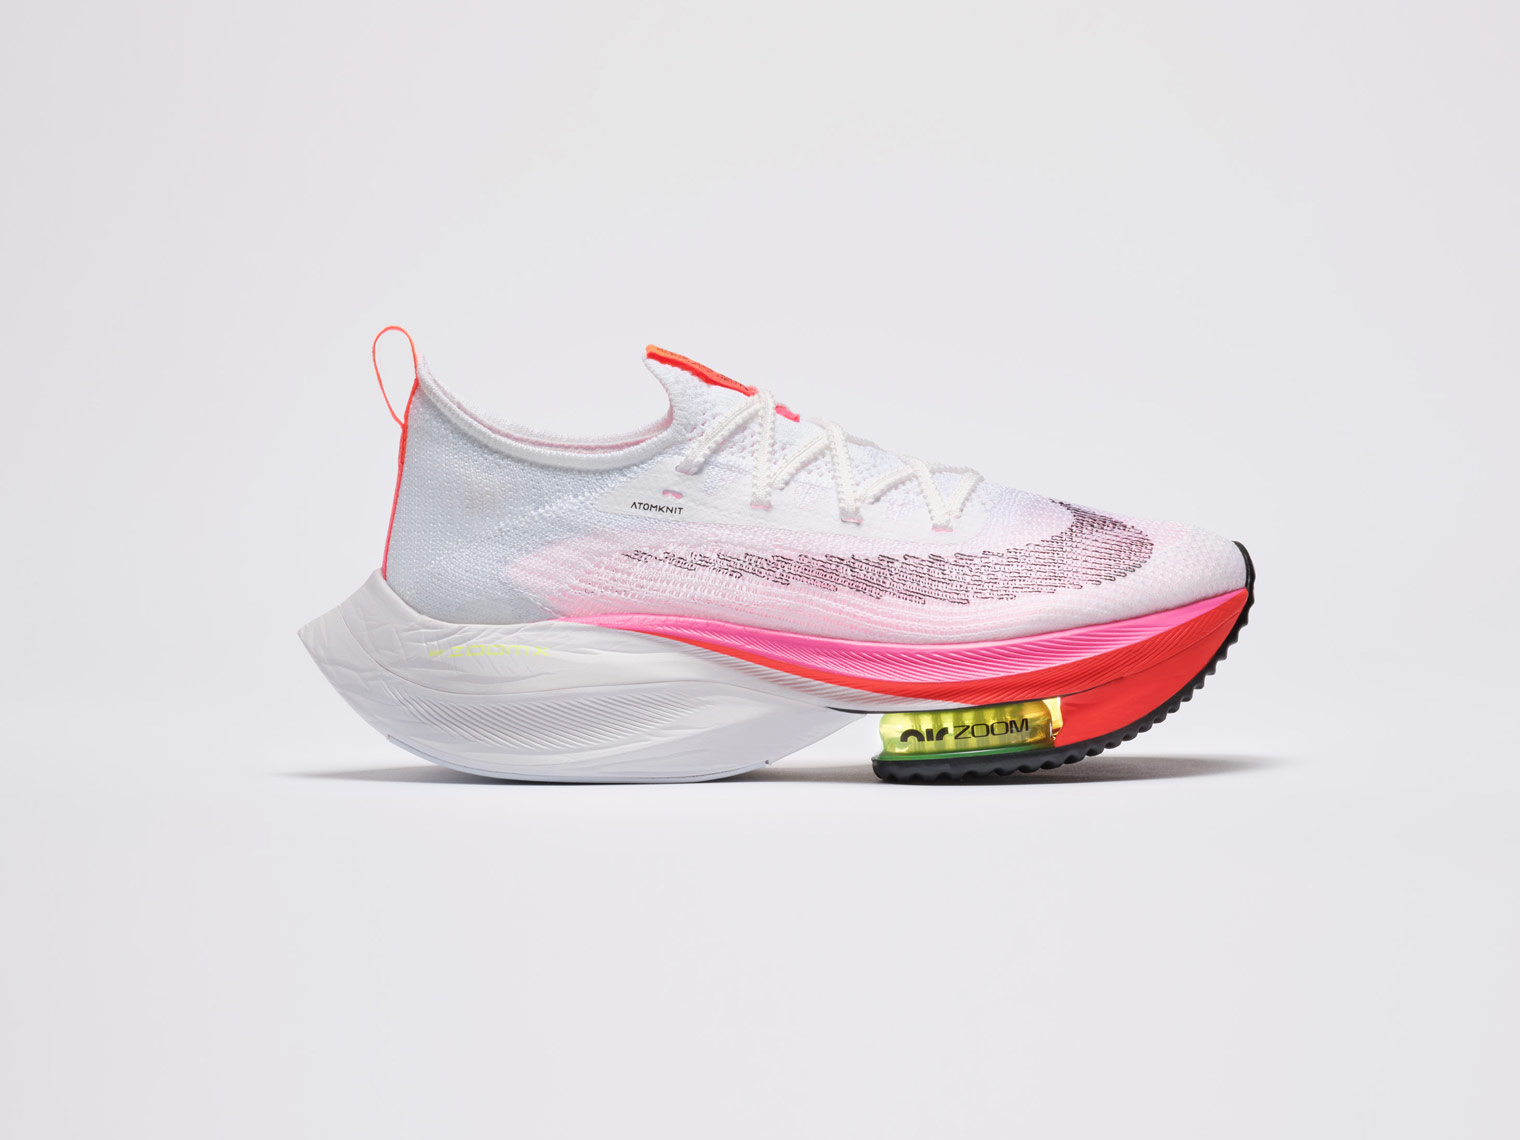 nike tokyo olympics athlete zoomX trainer